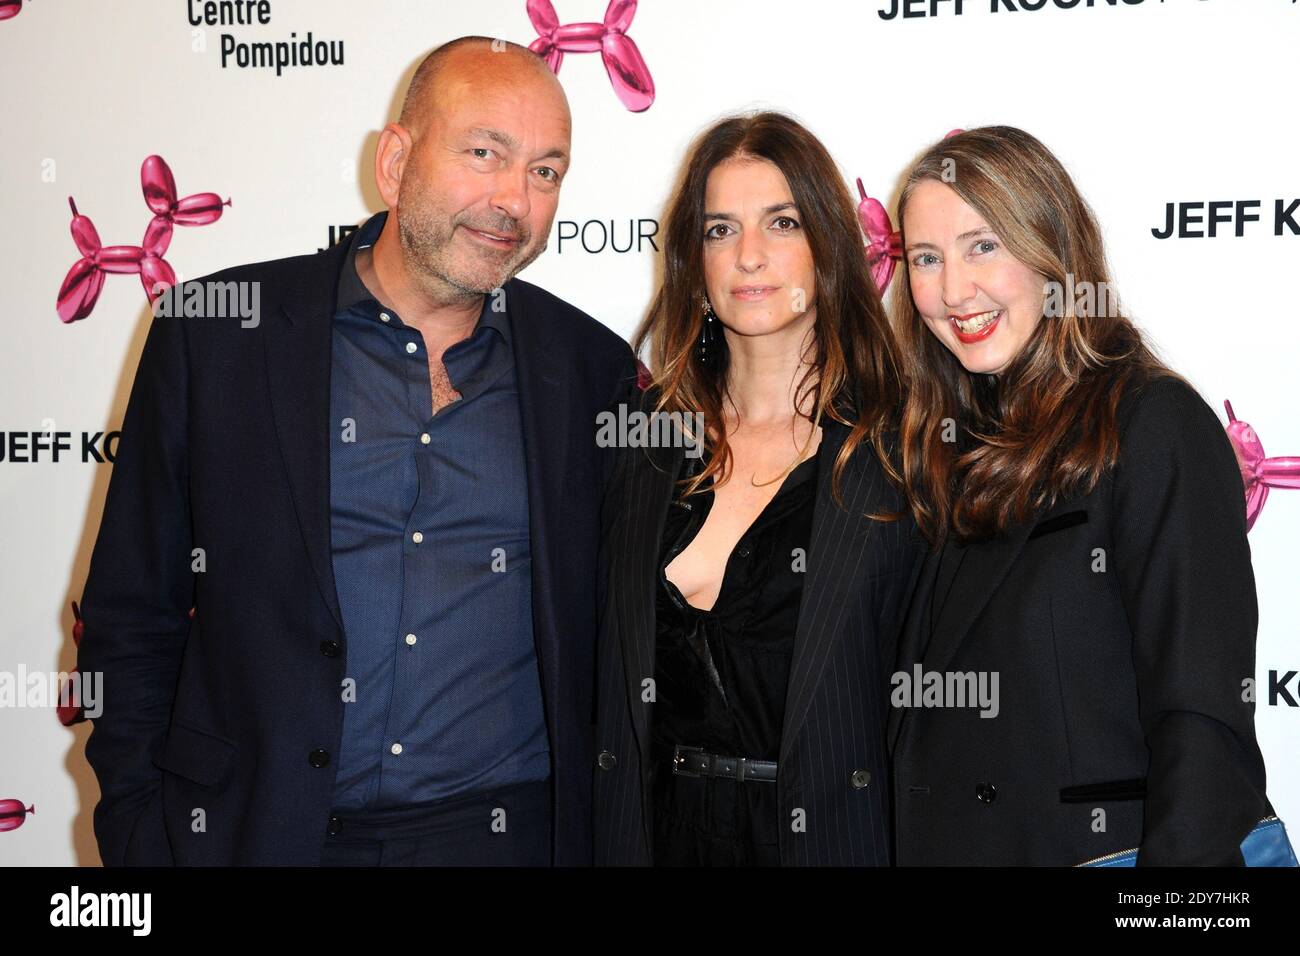 Creative Director Donald Schneider, Joana Preiss and H&M Head of Design Ann  Sofie Johansson attending the Jeff Koons for H&M party at the Centre  Pompidou in Paris, France, on december 10, 2014.